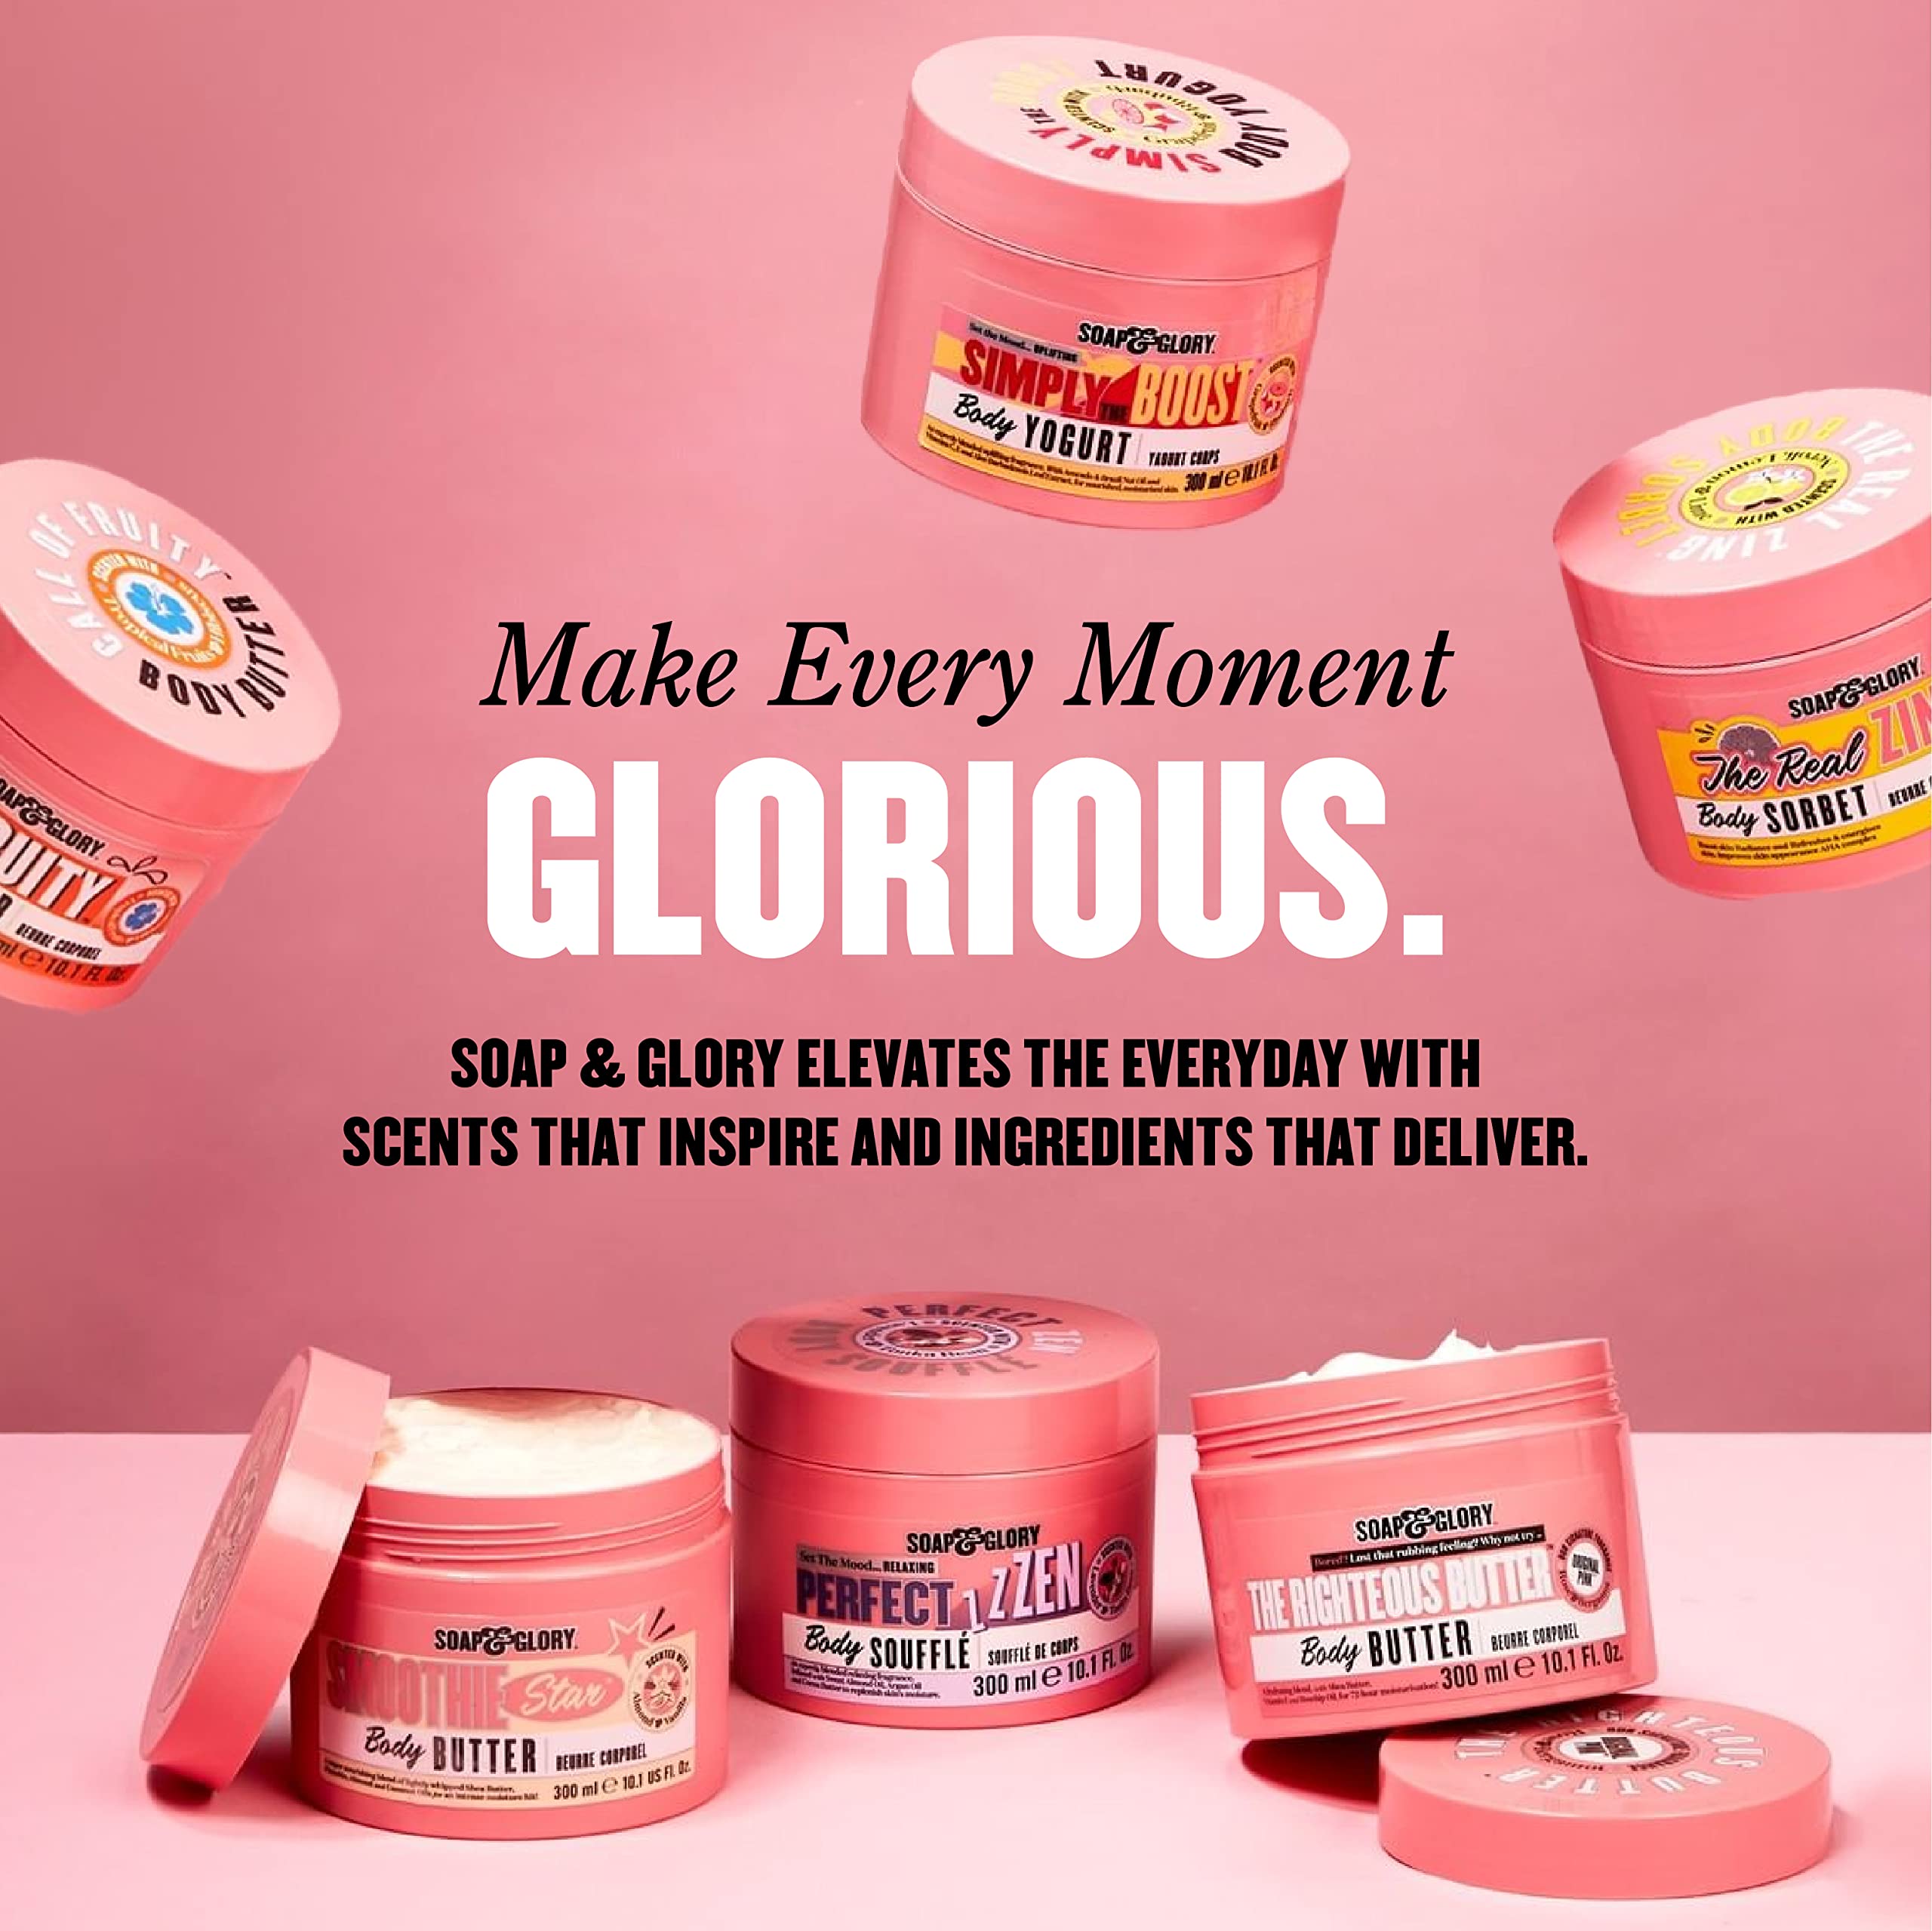 Soap & Glory All The Right Smoothes In-Shower Moisturizer - Lock In Lasting Hydration with our Avocado Oil, Vitamin E & Vitamin C Body Moisturizer - Citrus Scent Body Lotion for Use In Shower (250ml)